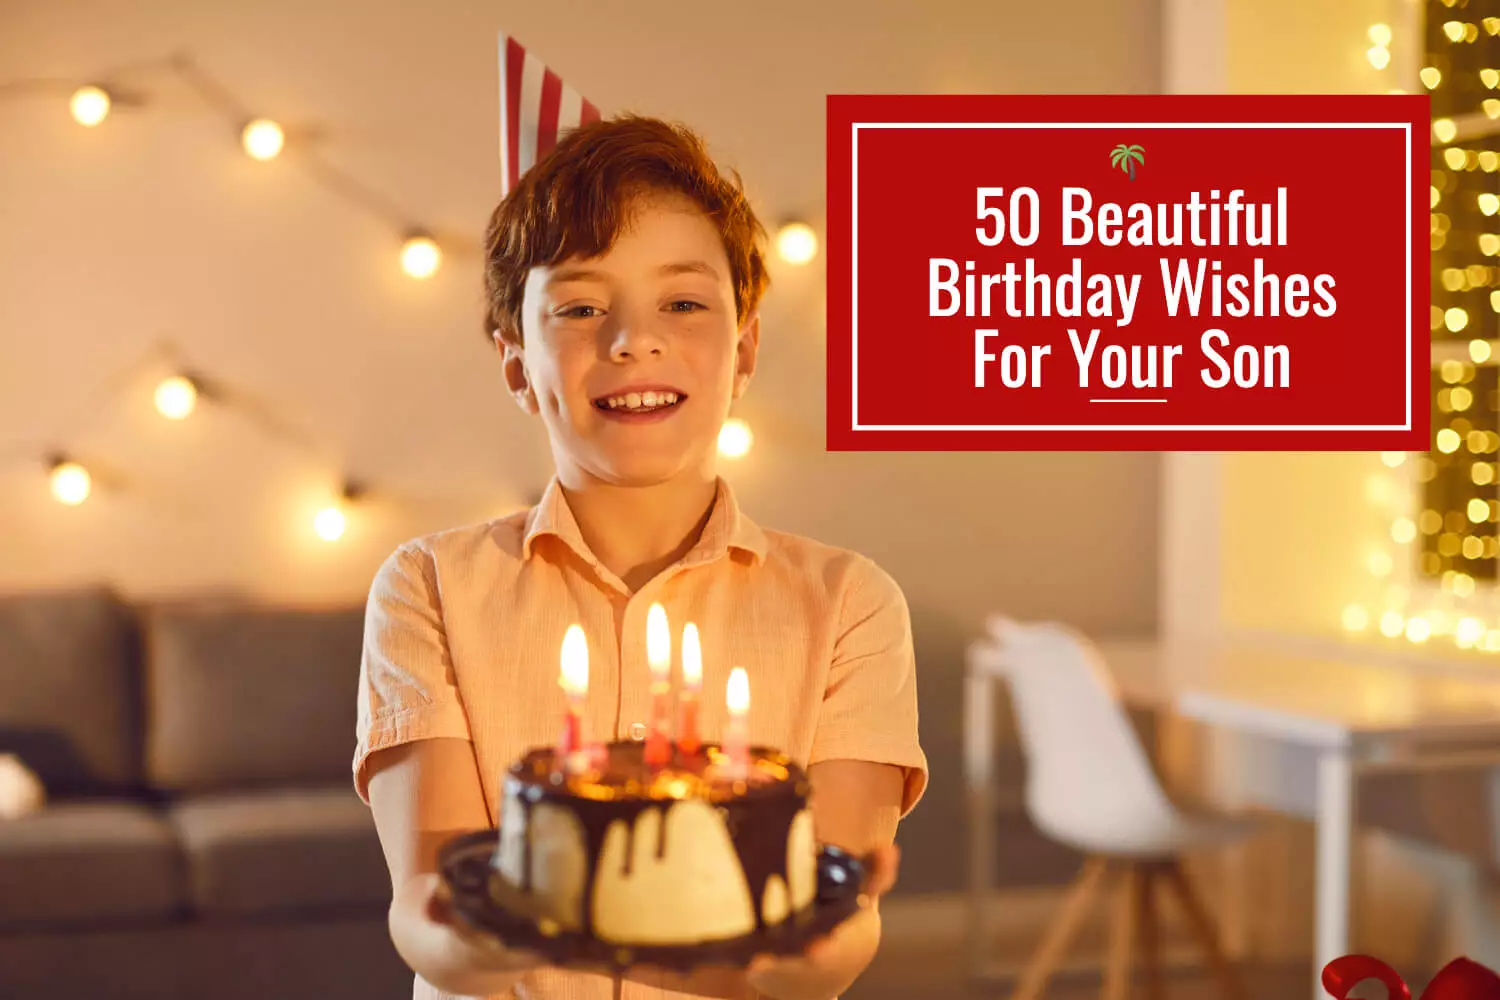 50 Beautiful Birthday Wishes For Your Son